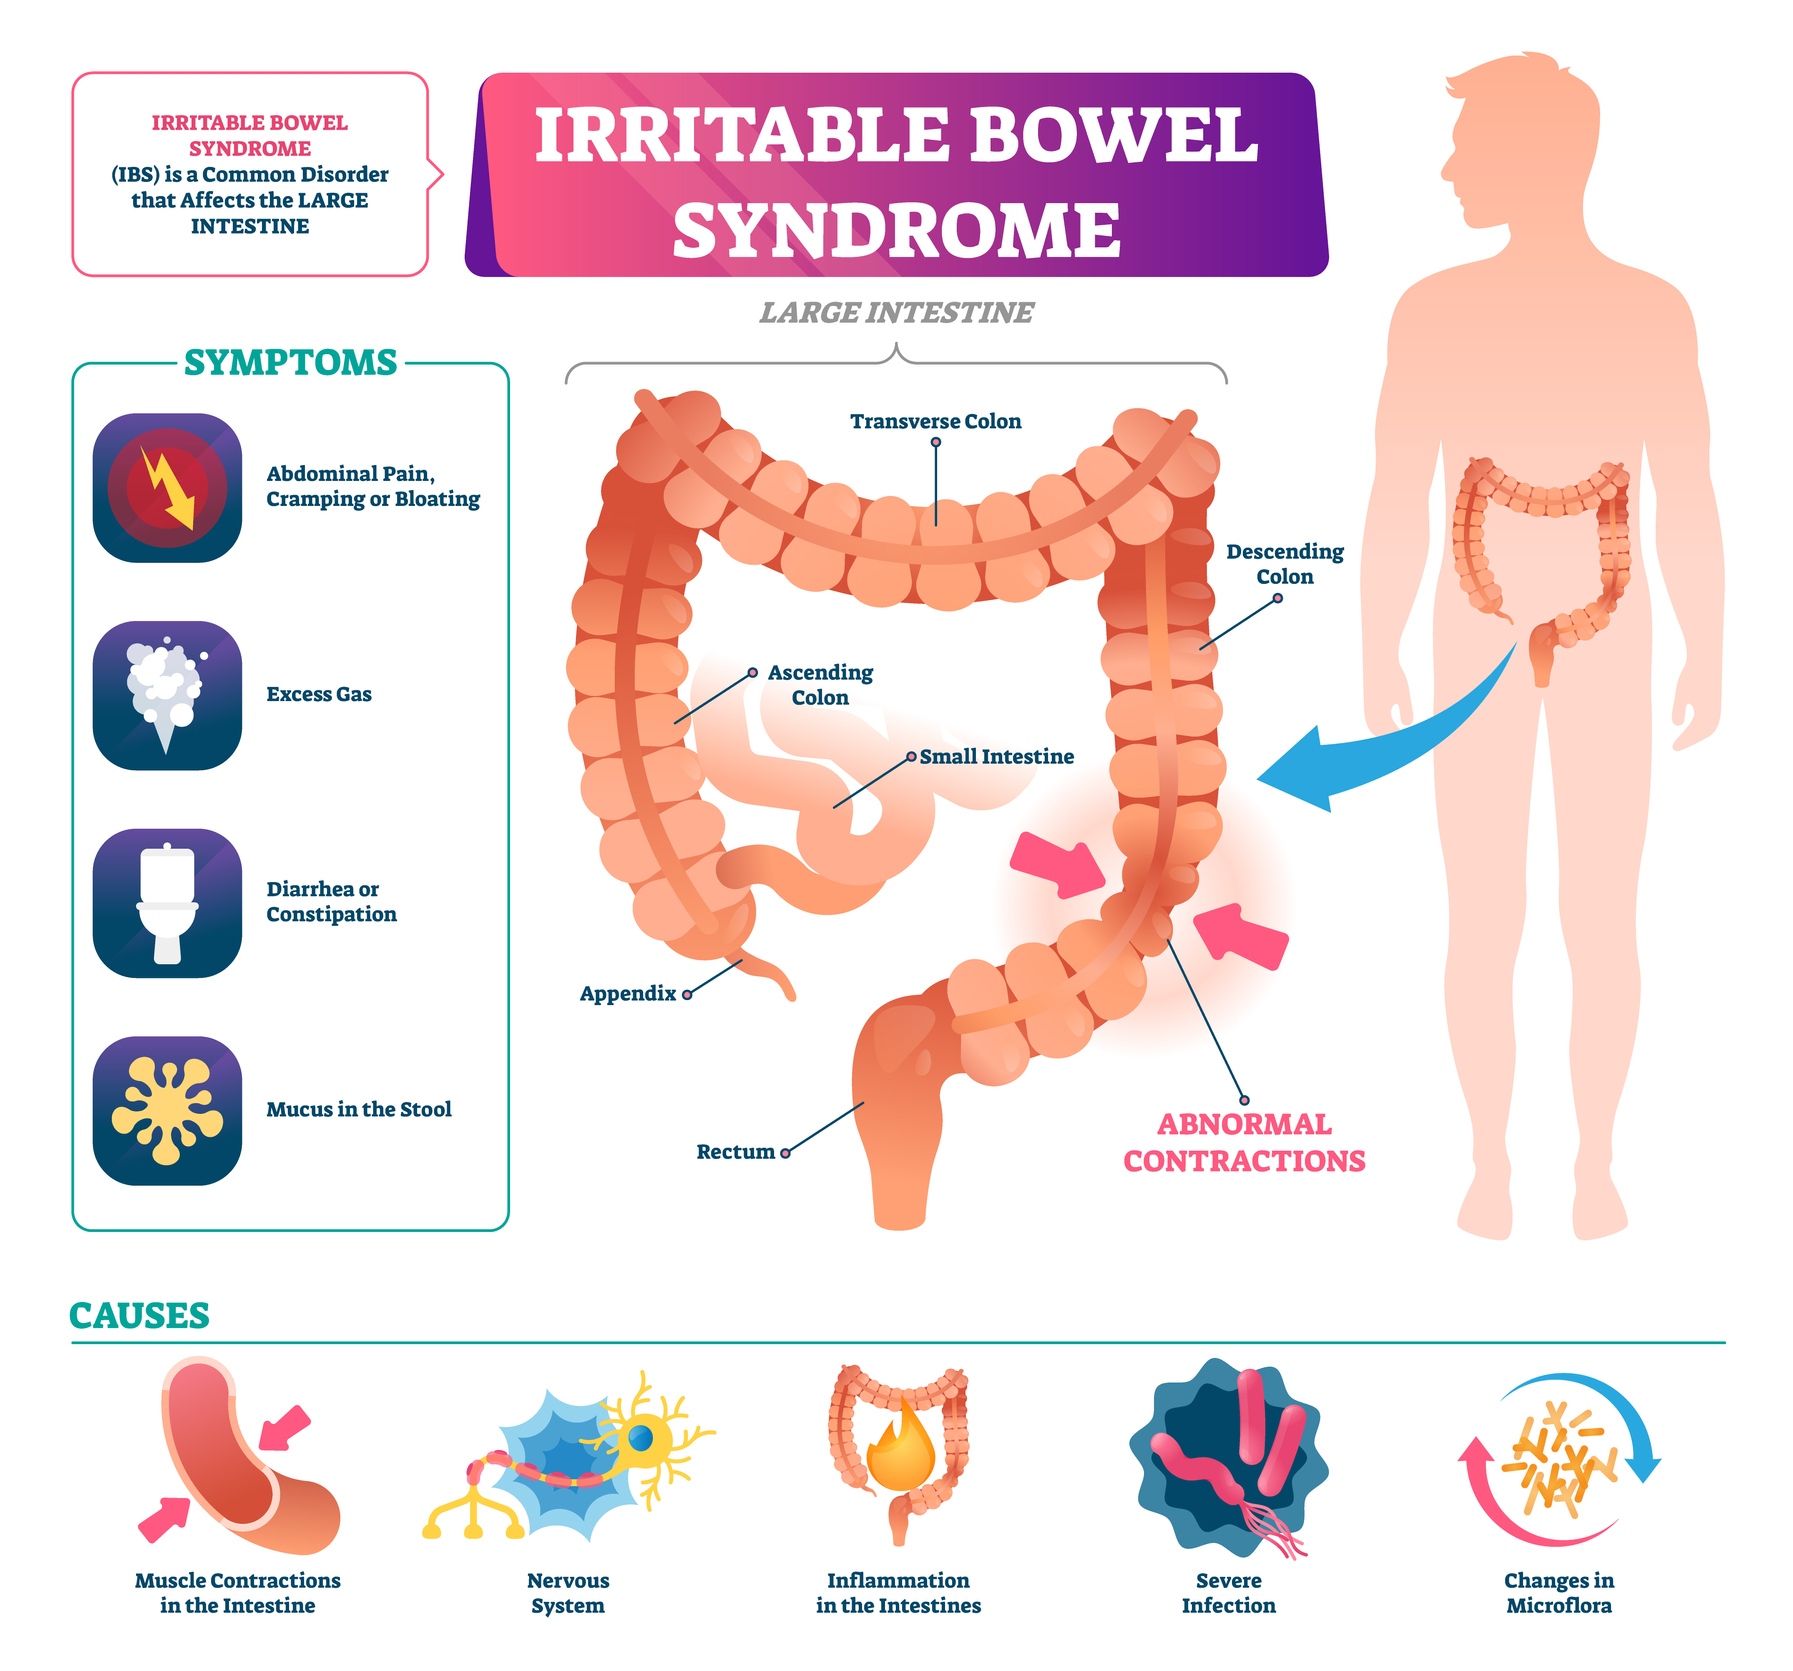 Cartoon images of a human body and large intestine and images illustrating symptoms and causes of irritable bowel syndrome with explanatory text described below. 